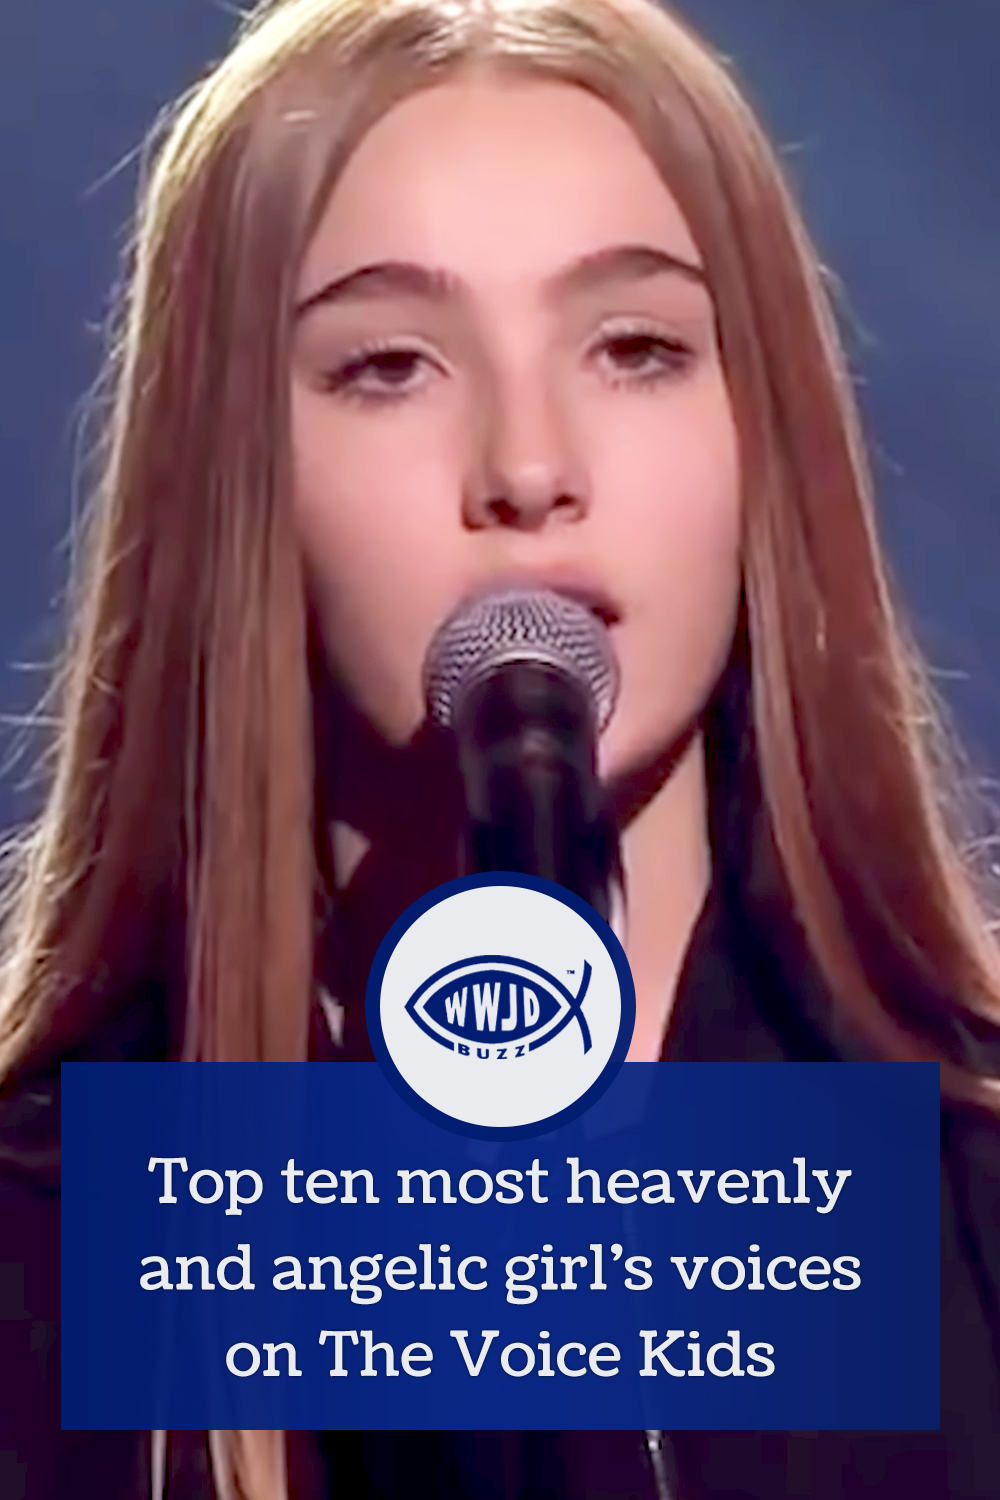 Top ten most heavenly and angelic girl’s voices on The Voice Kids